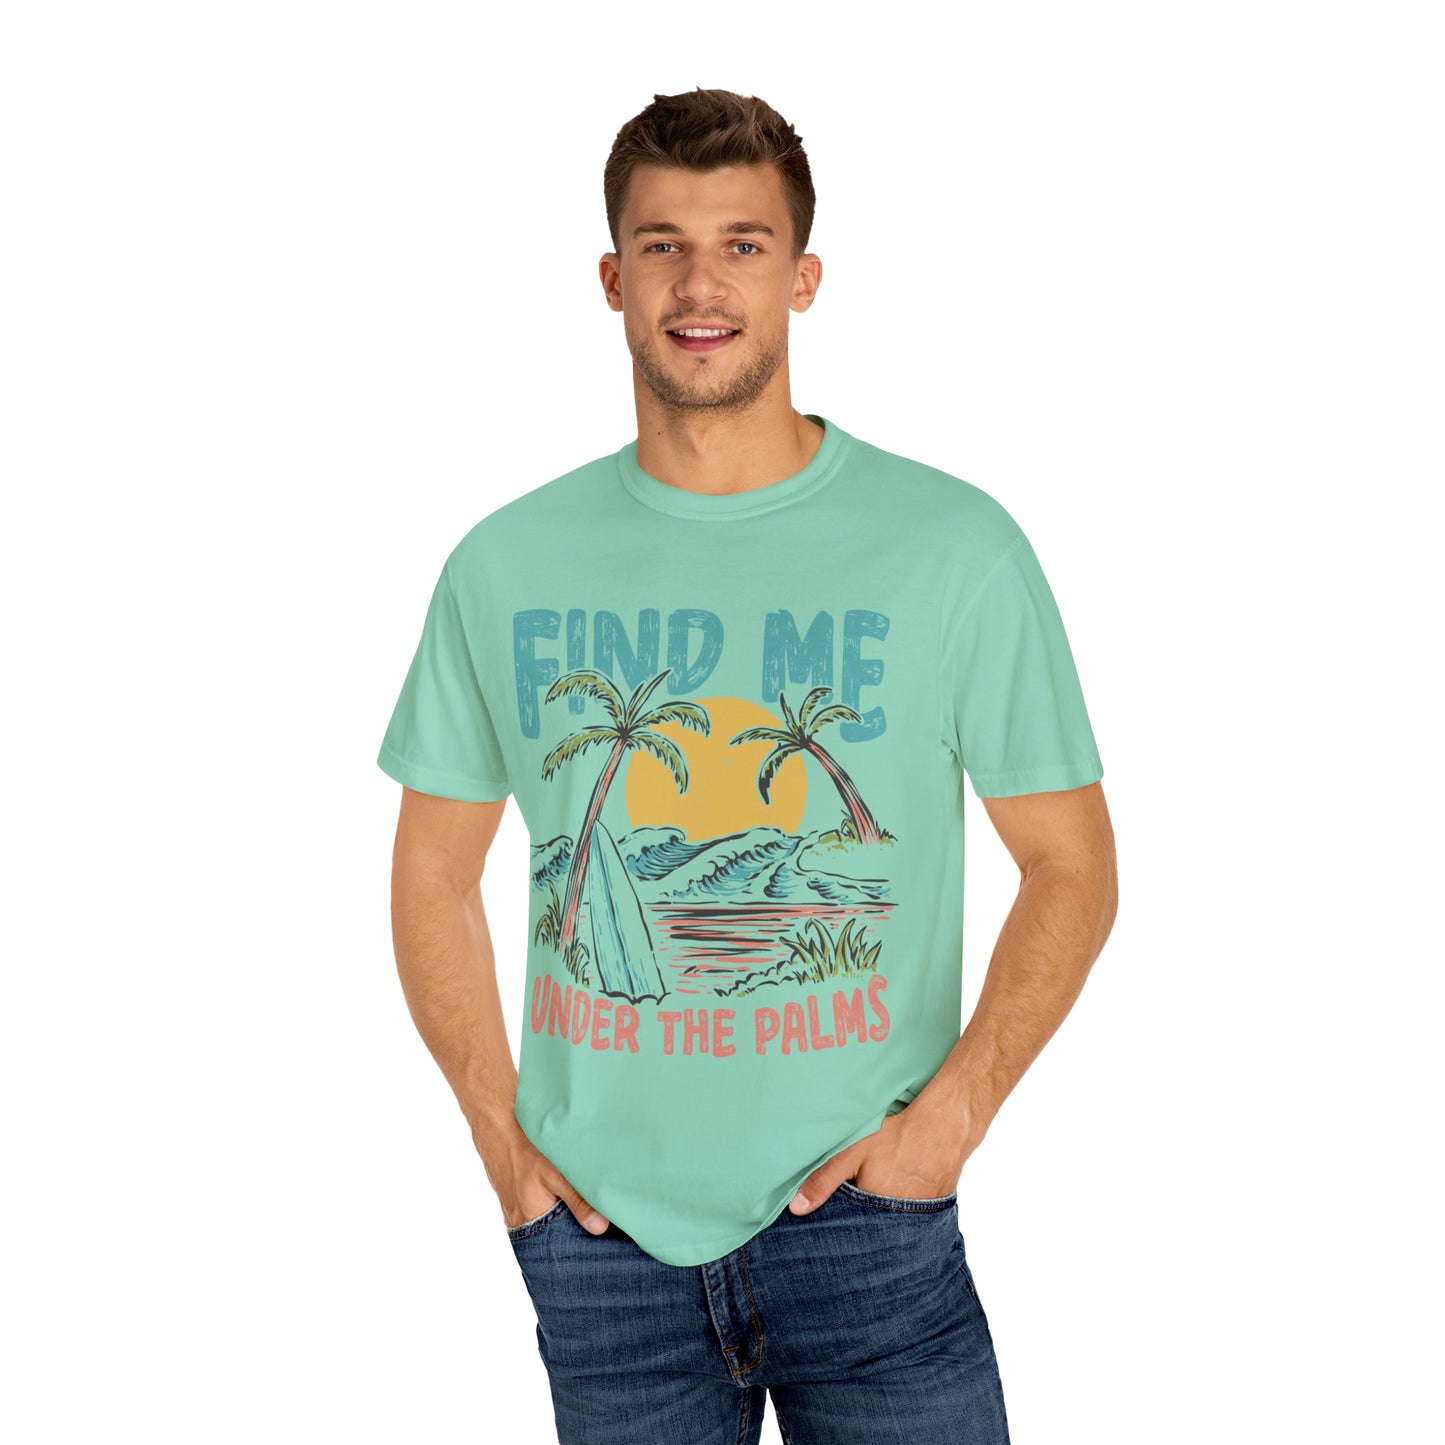 "Find Me Under The Palms" Comfort Colors Oversized T-shirt